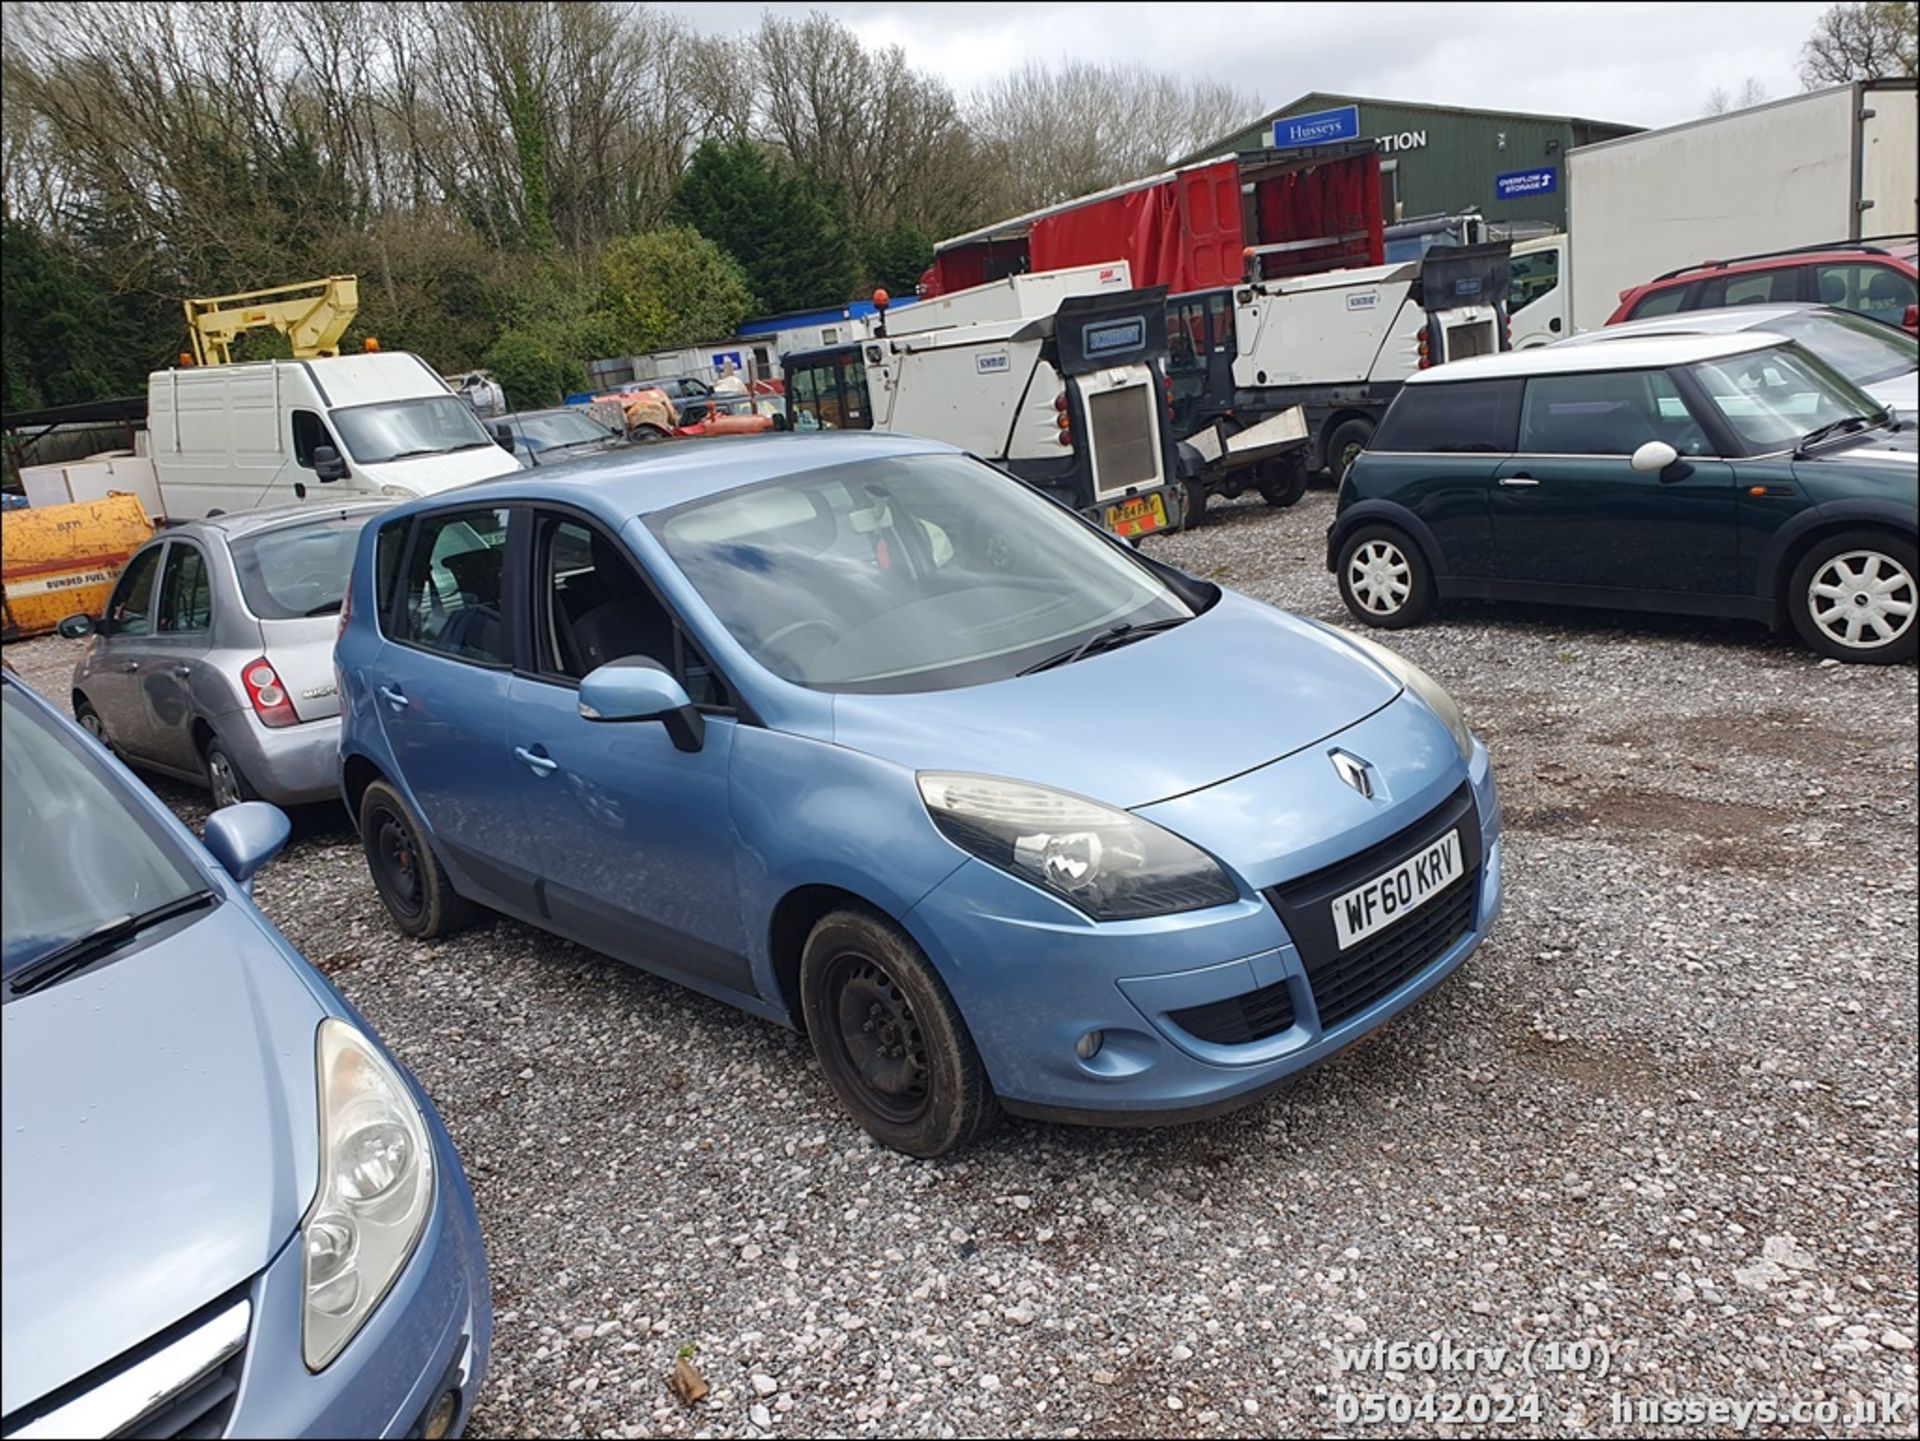 10/60 RENAULT SCENIC EXPRESSION DCI 105 - 1461cc 5dr MPV (Blue) - Image 11 of 50